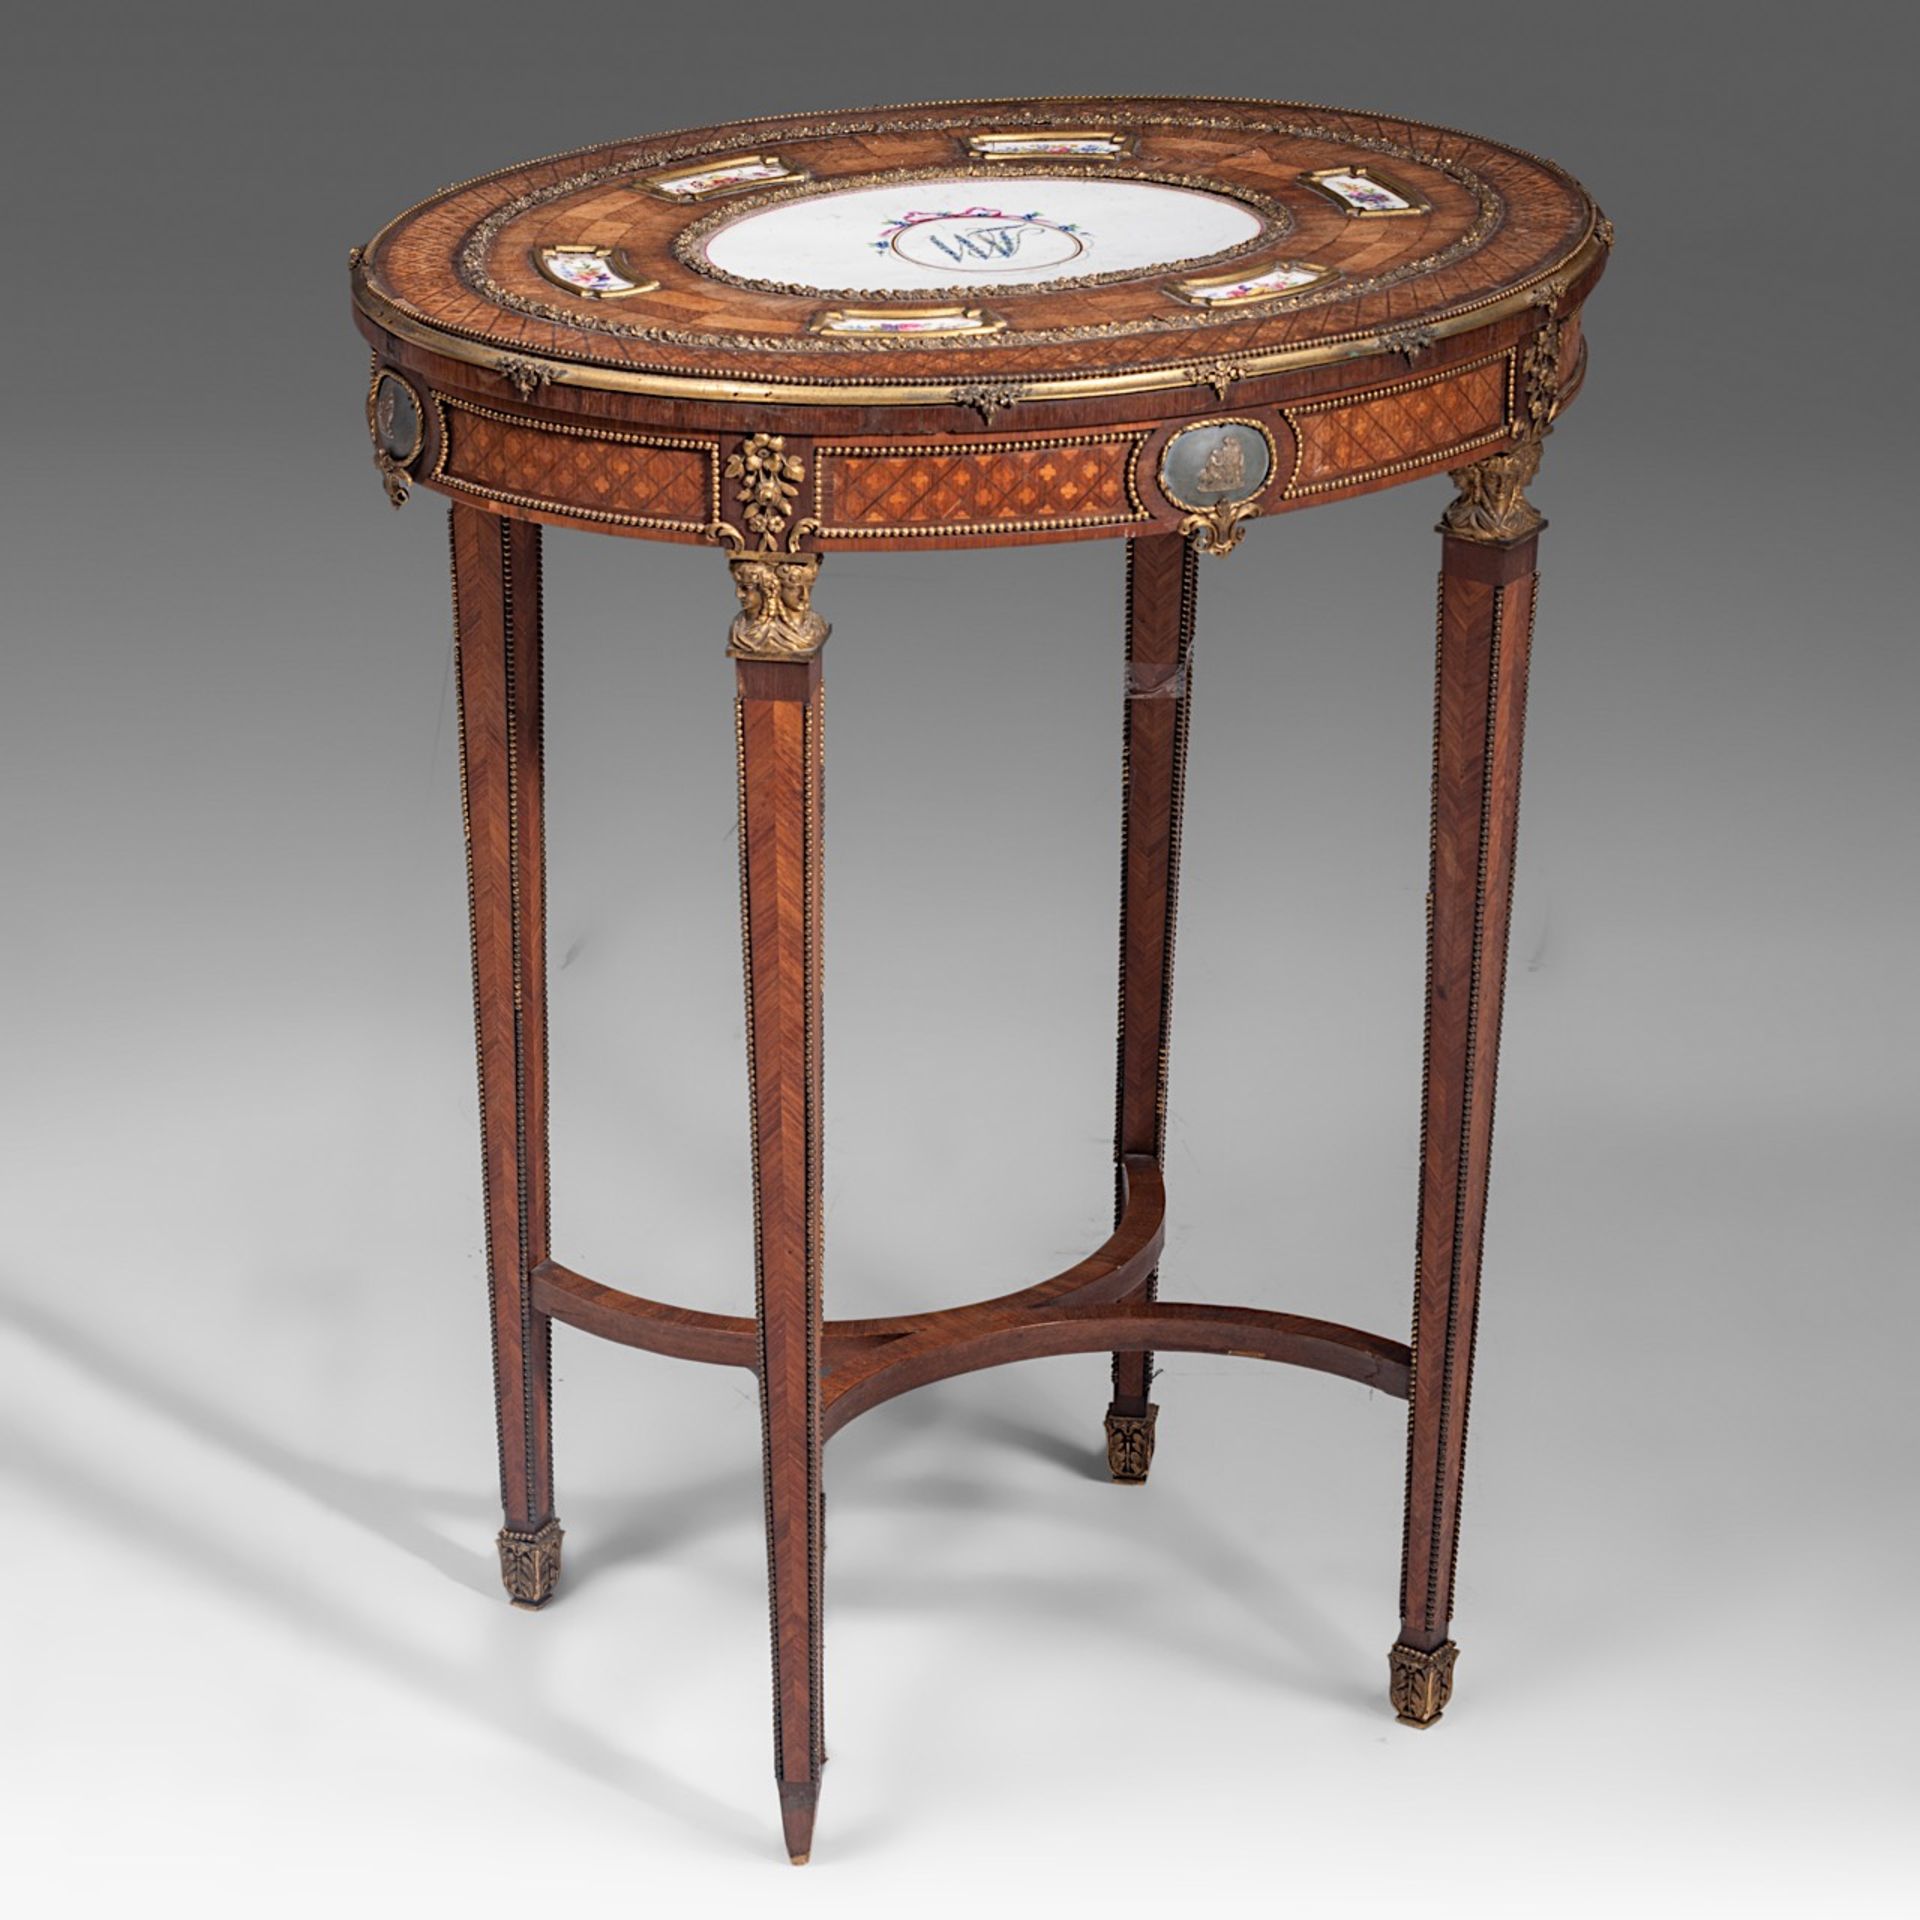 A fine Louis XVI style parquetry occasional table with Sevres porcelain plaques and gilt bronze moun